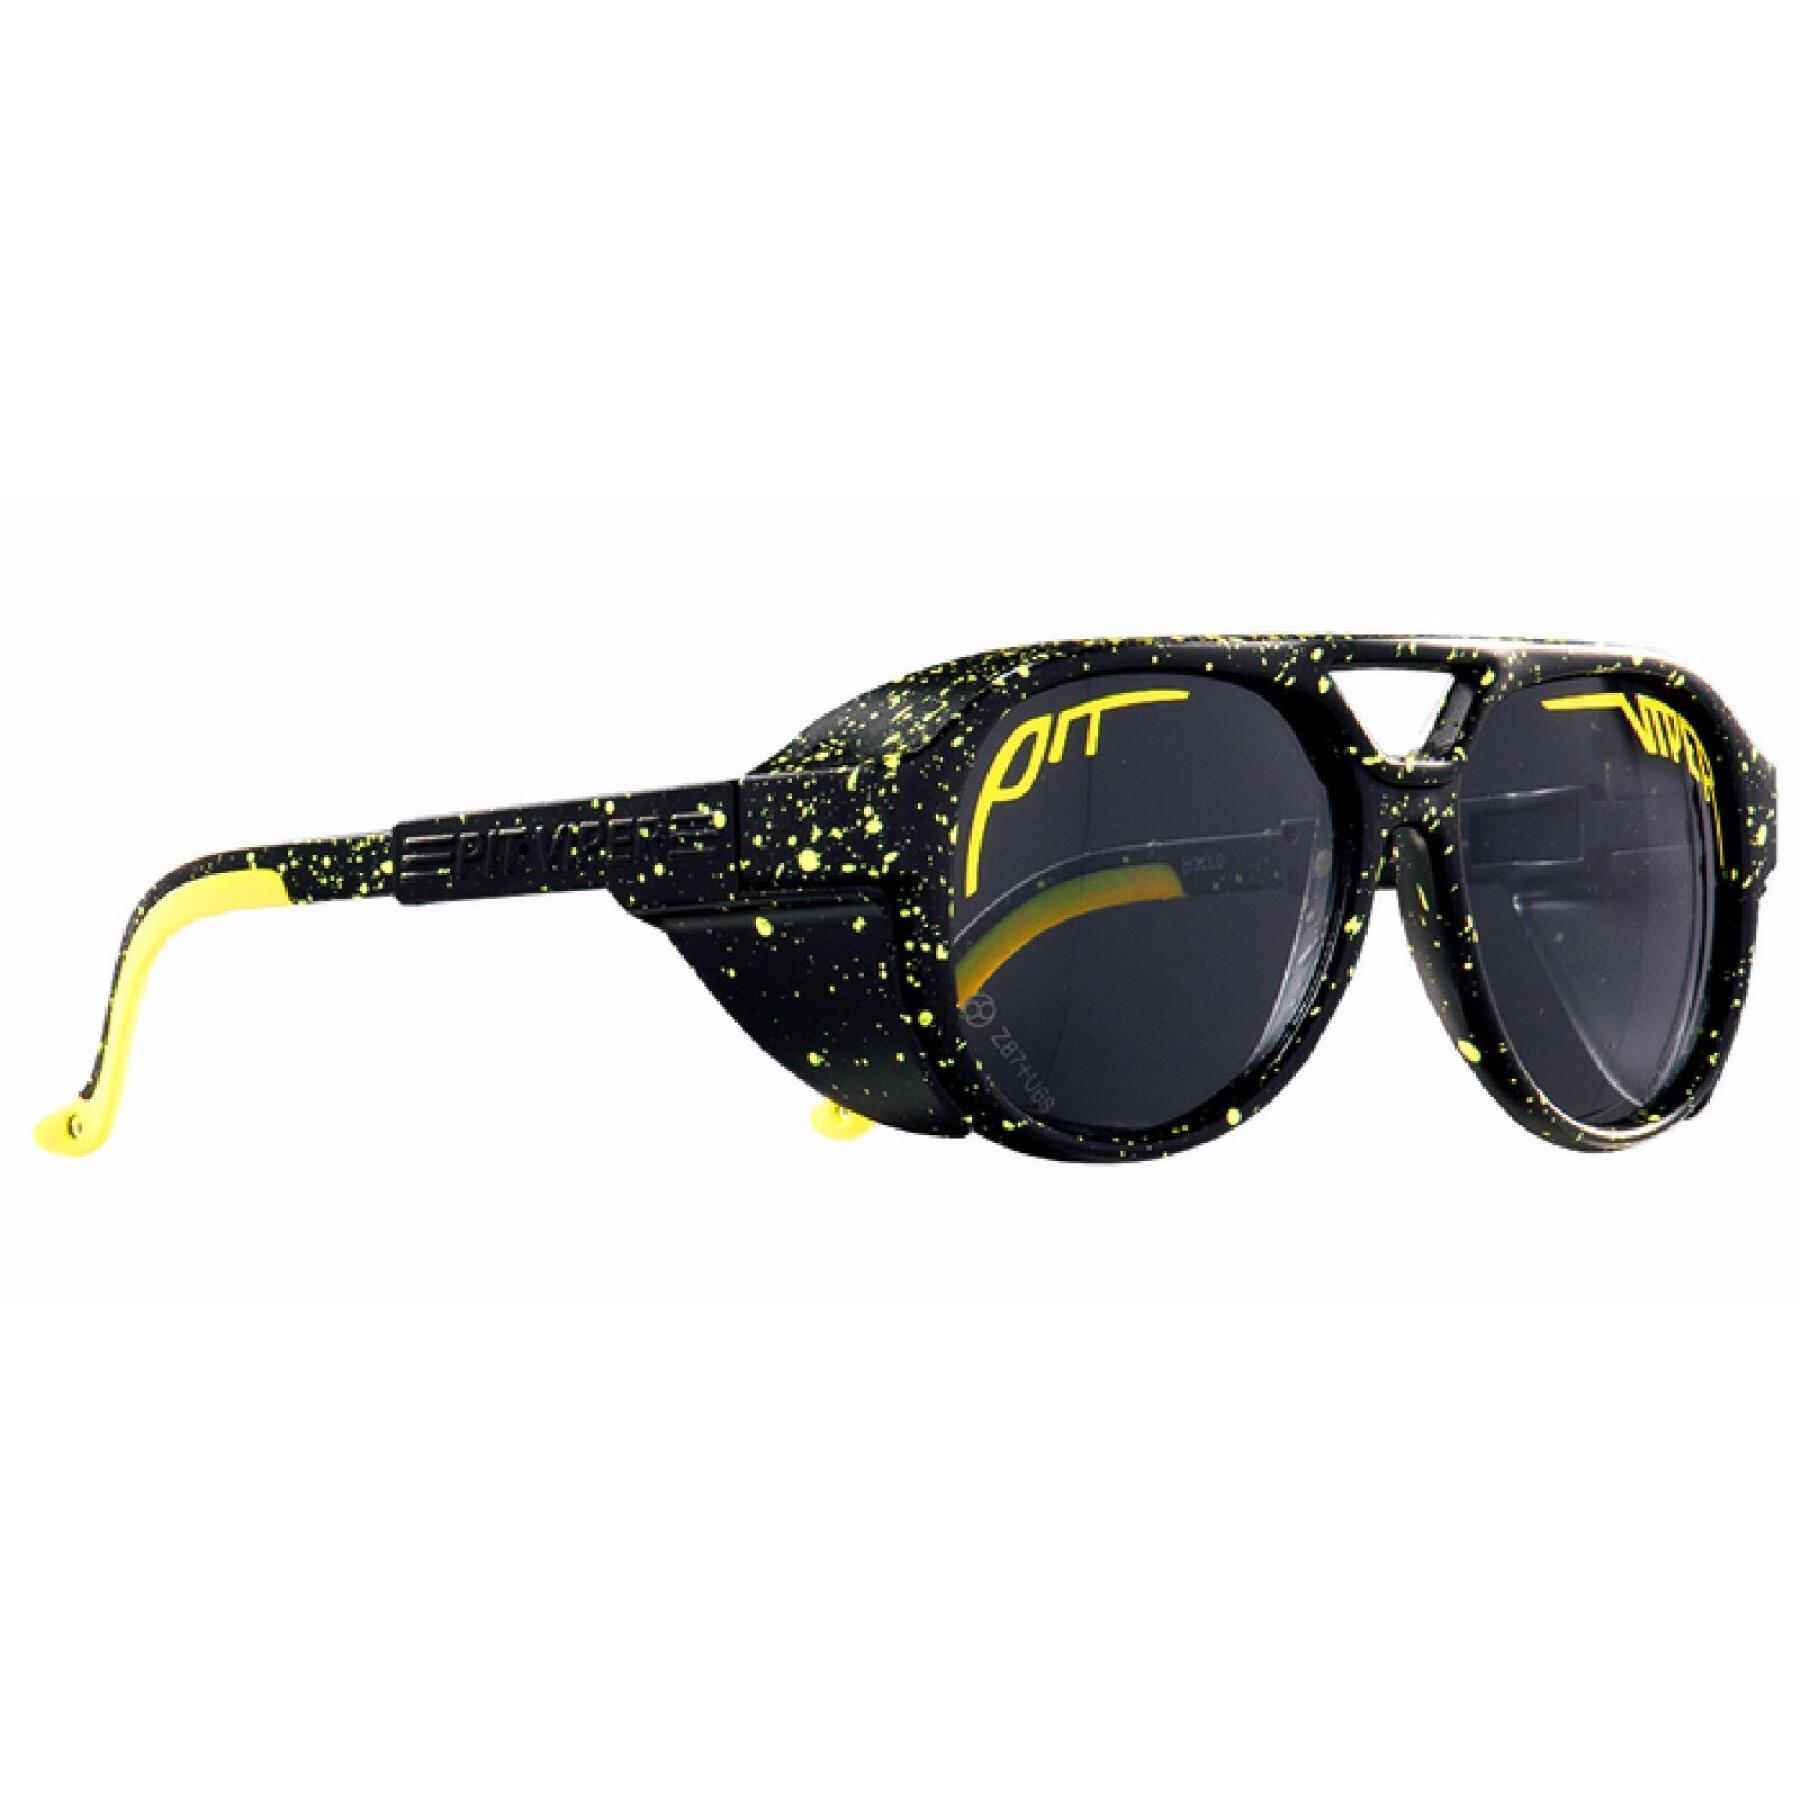 Polarized sunglasses Pit Viper The Cosmos Exciters